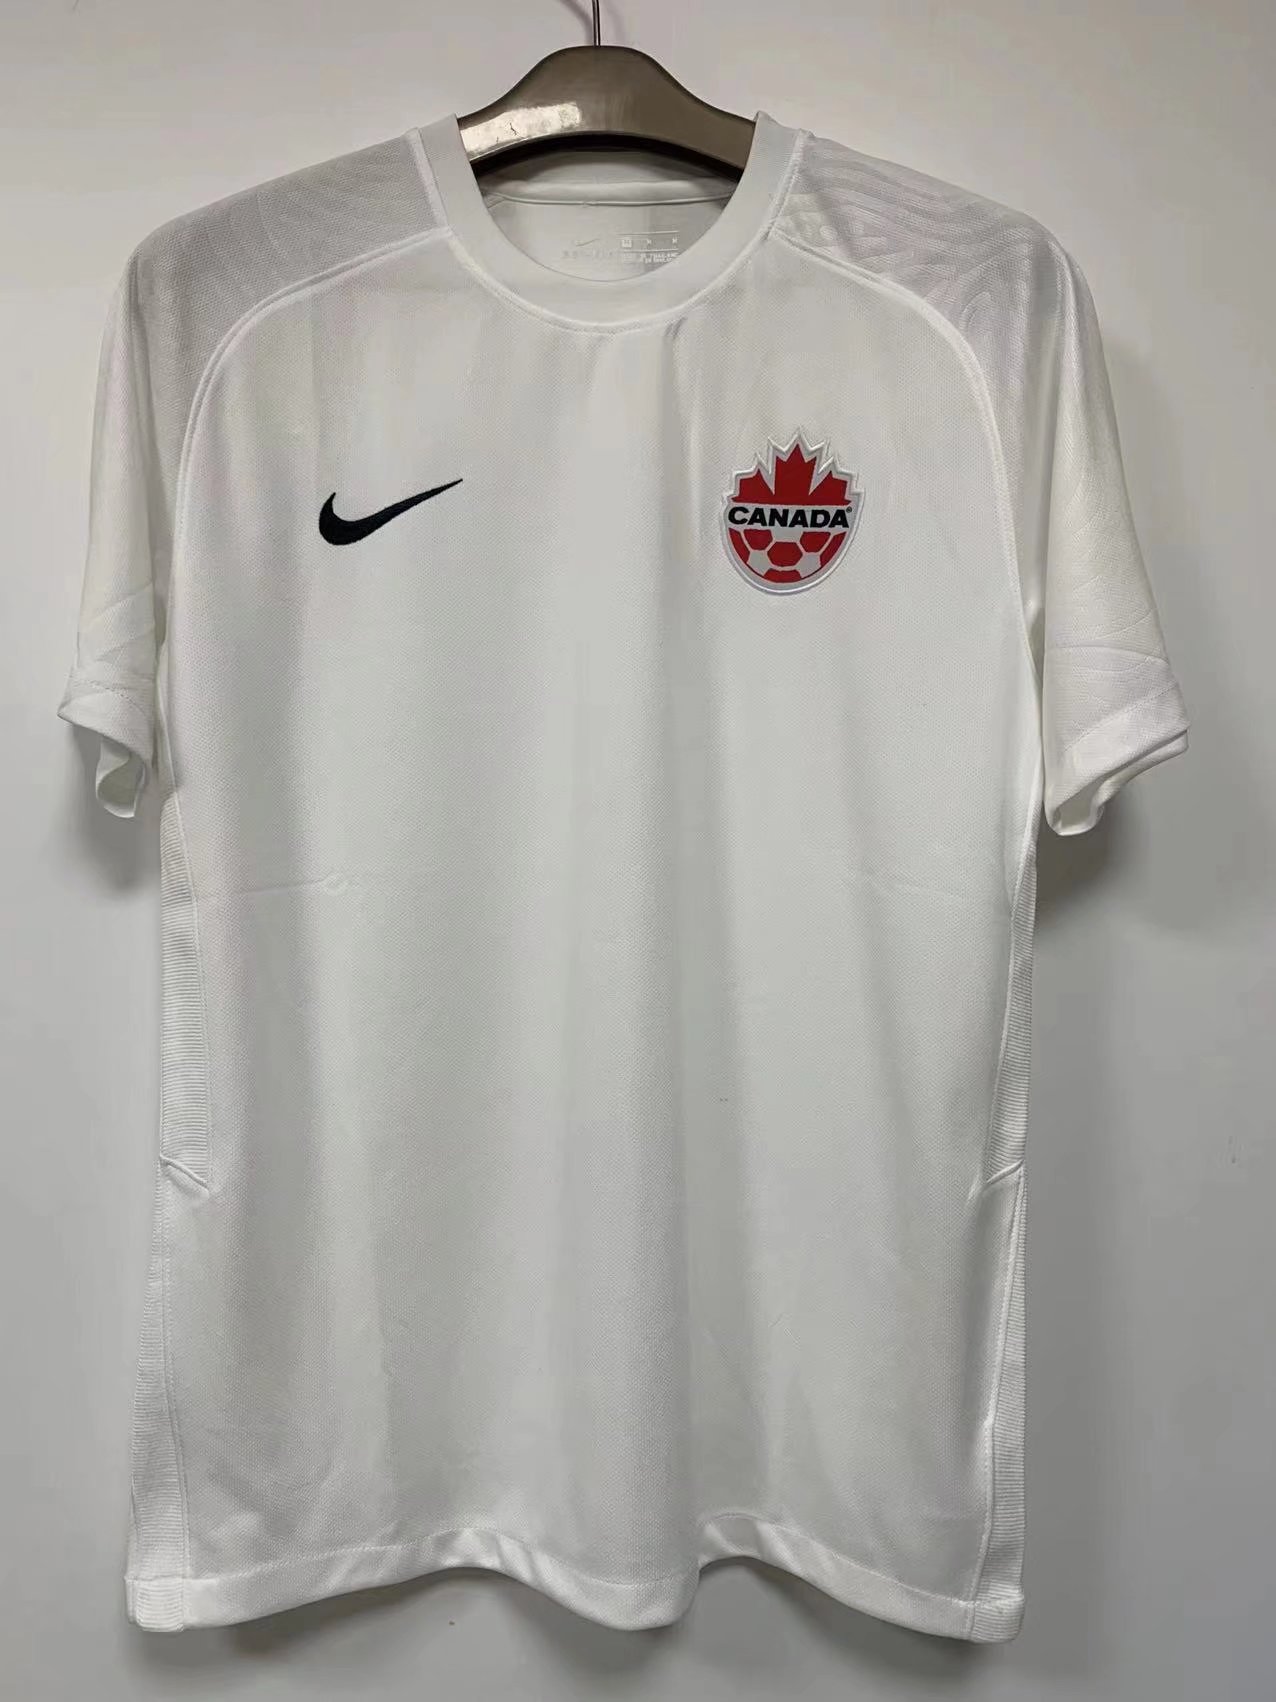 2021-2022 Canada Away white Thailand Soccer Jersey-522/320/503